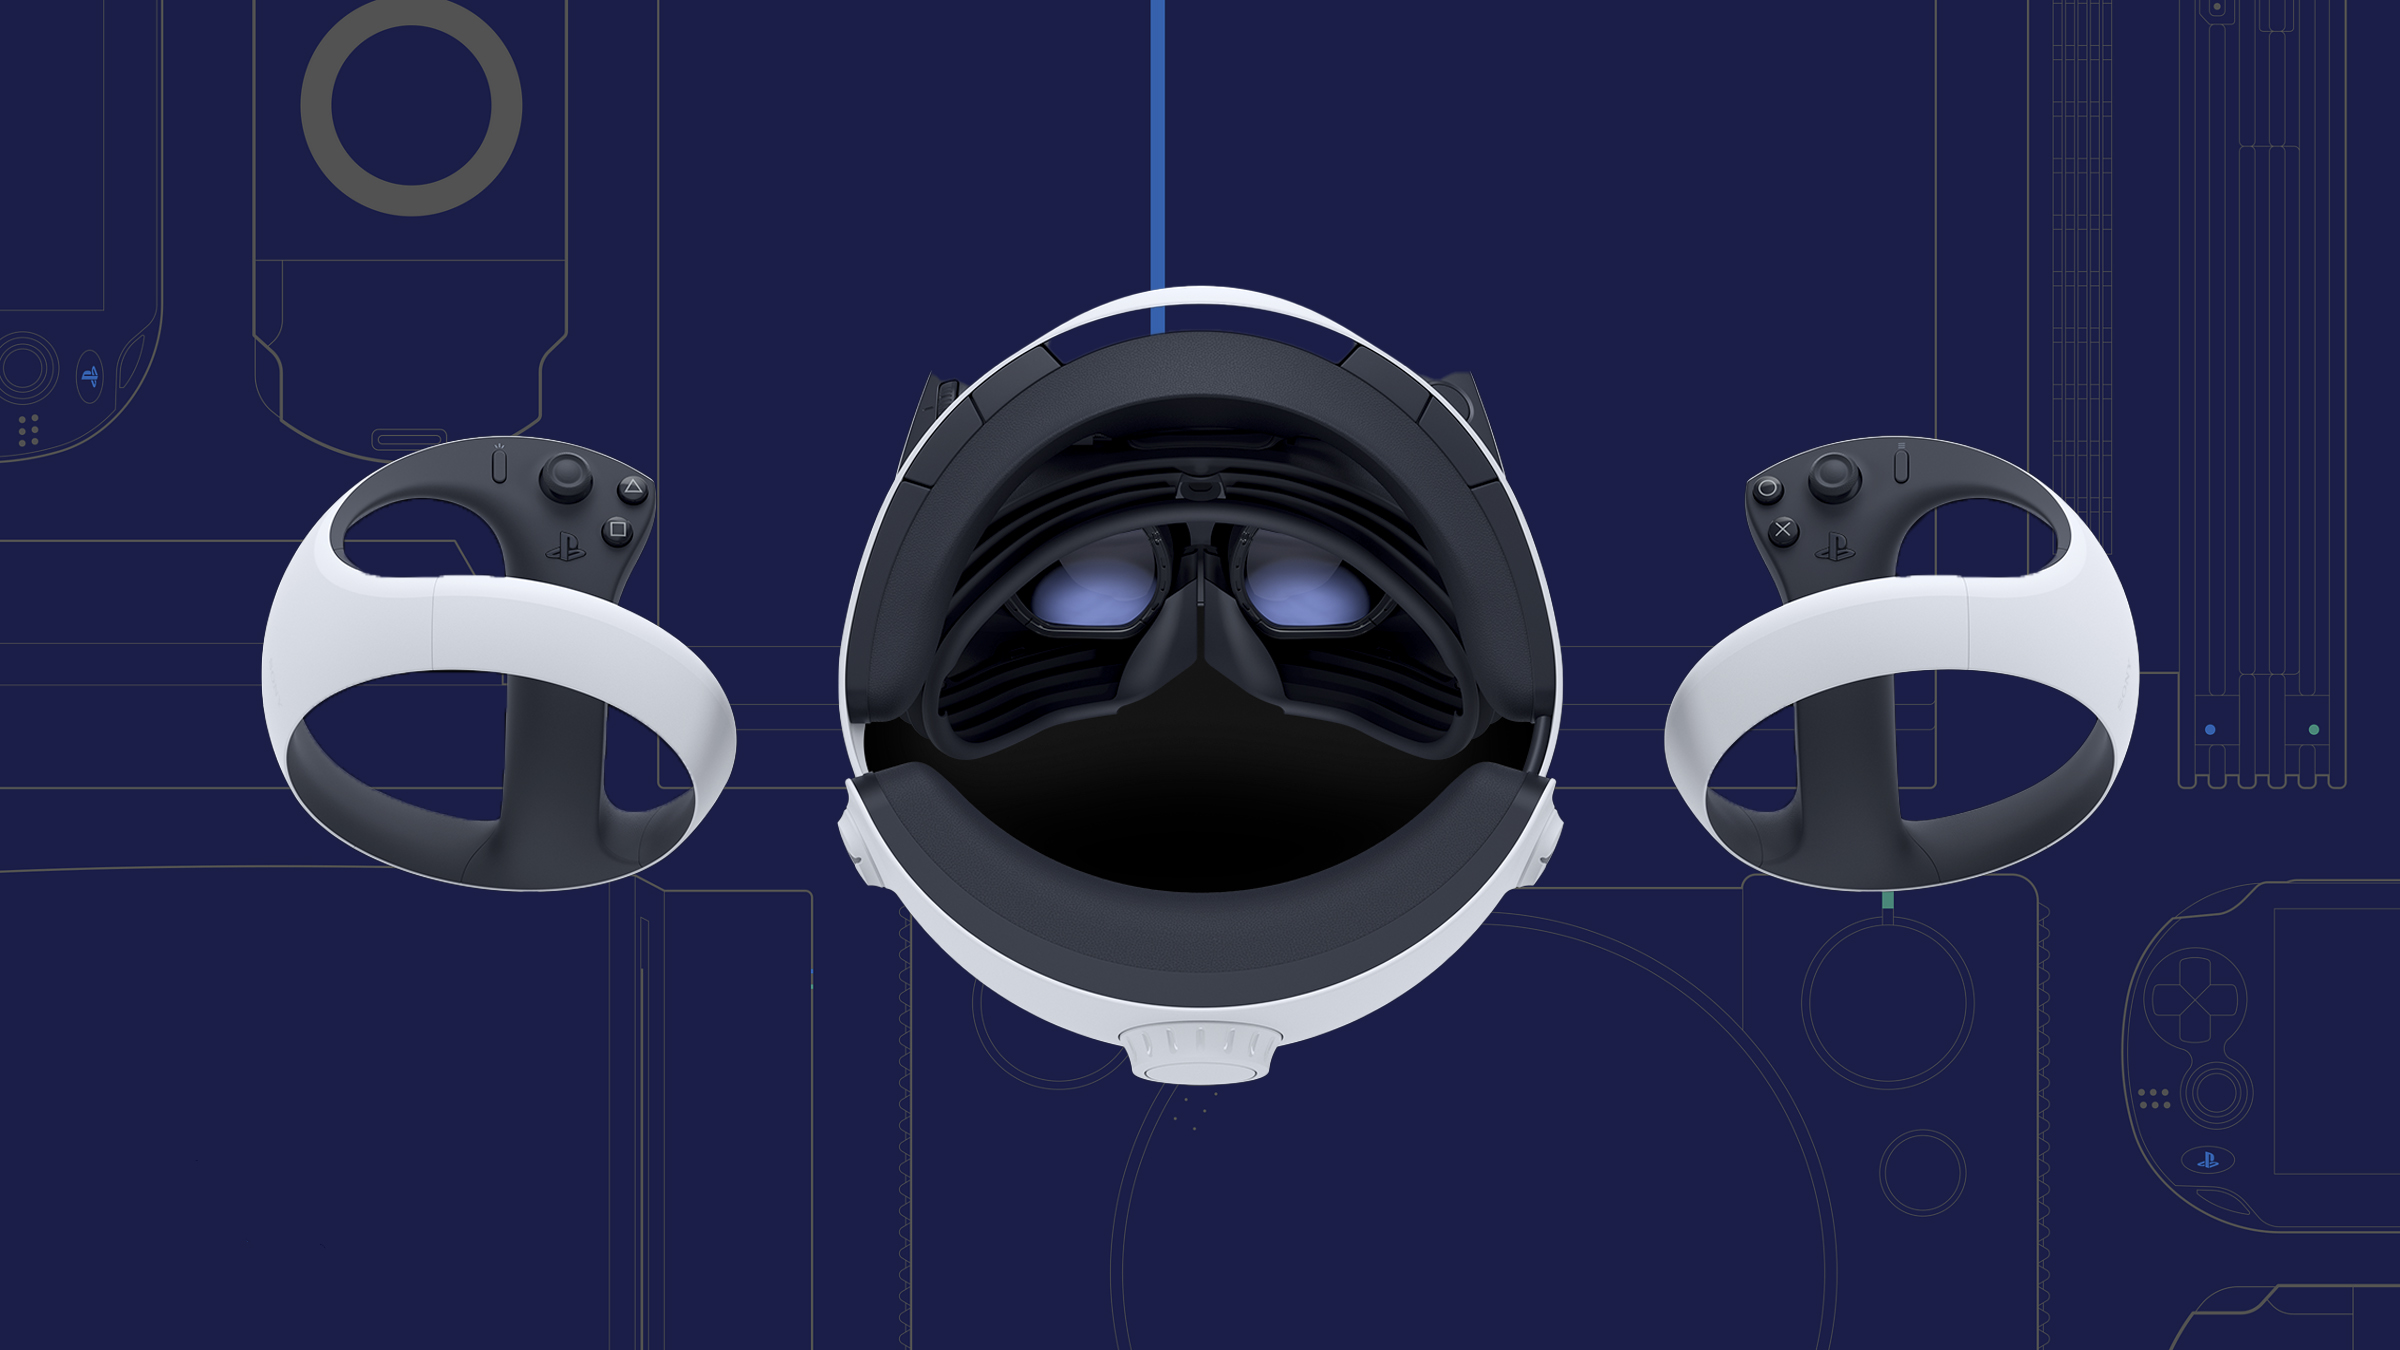 PSVR vs. PSVR 2: The difference between the Sony VR headsets